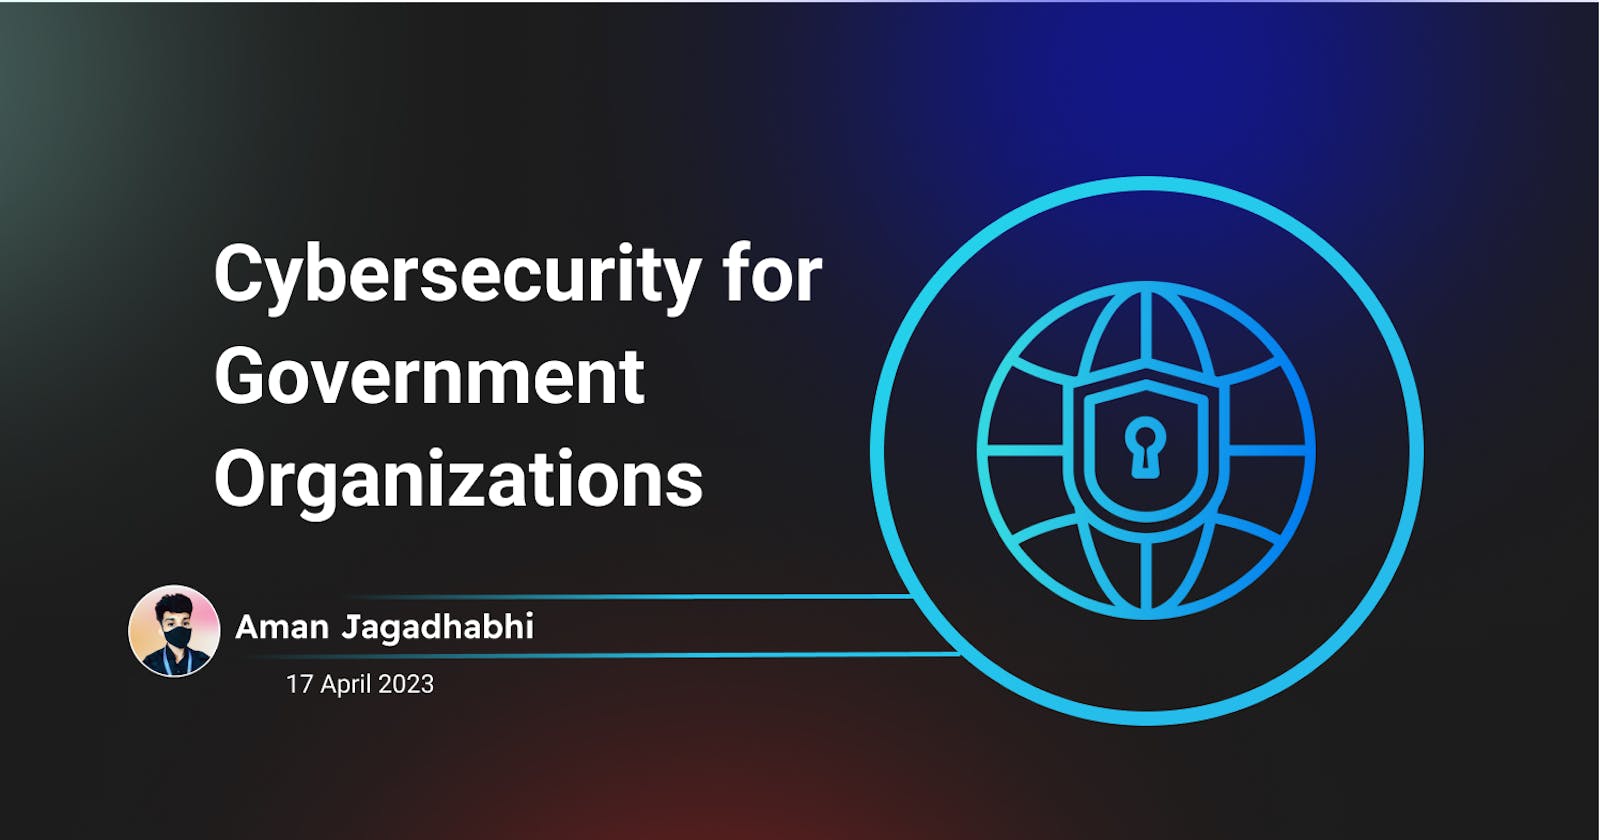 Cybersecurity for Government Organizations